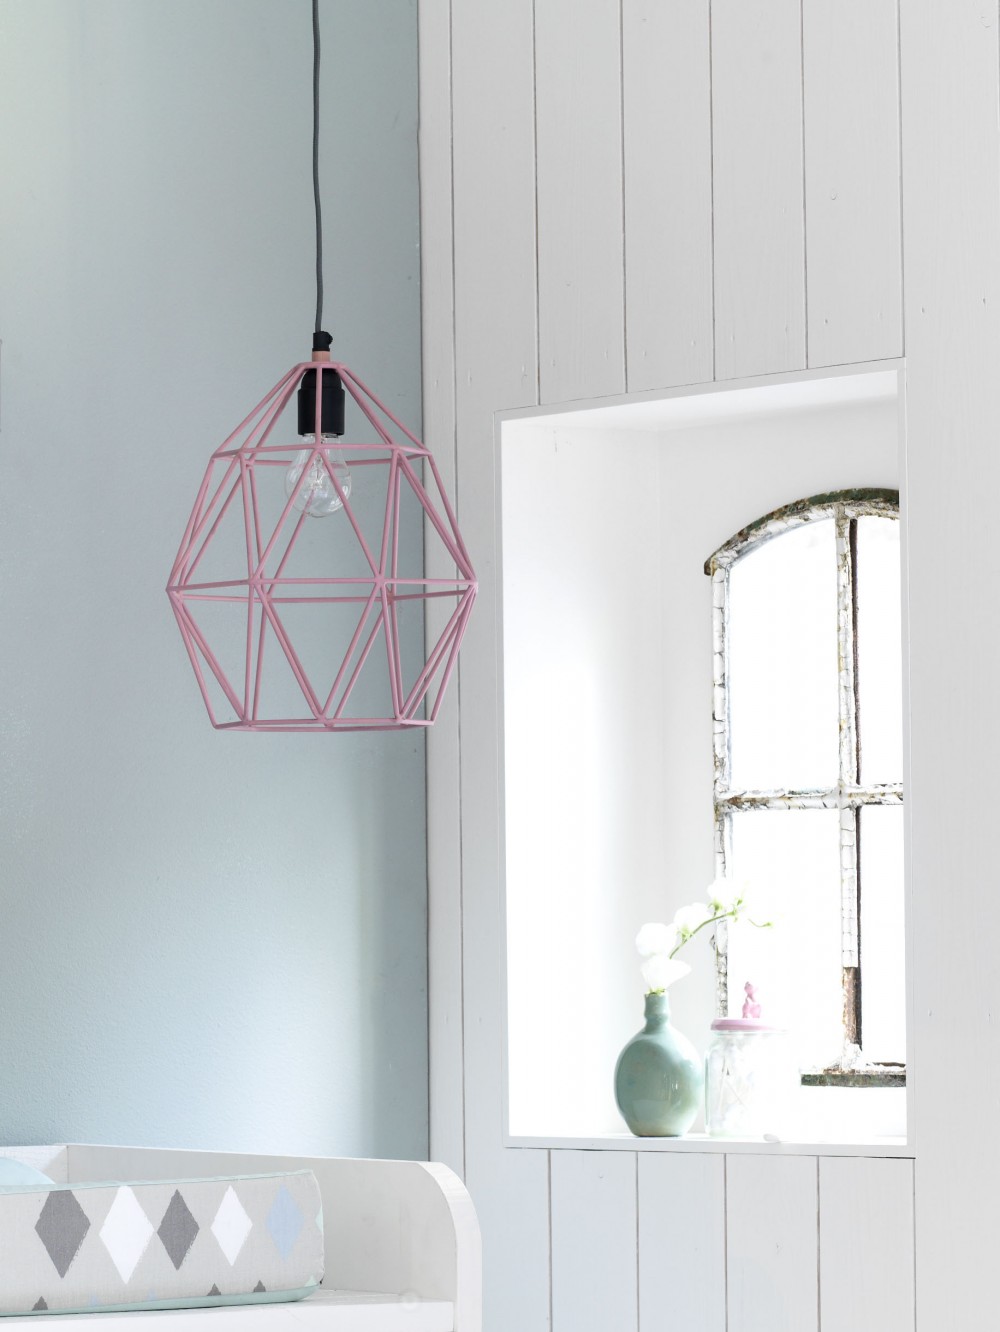 Wire hanglamp